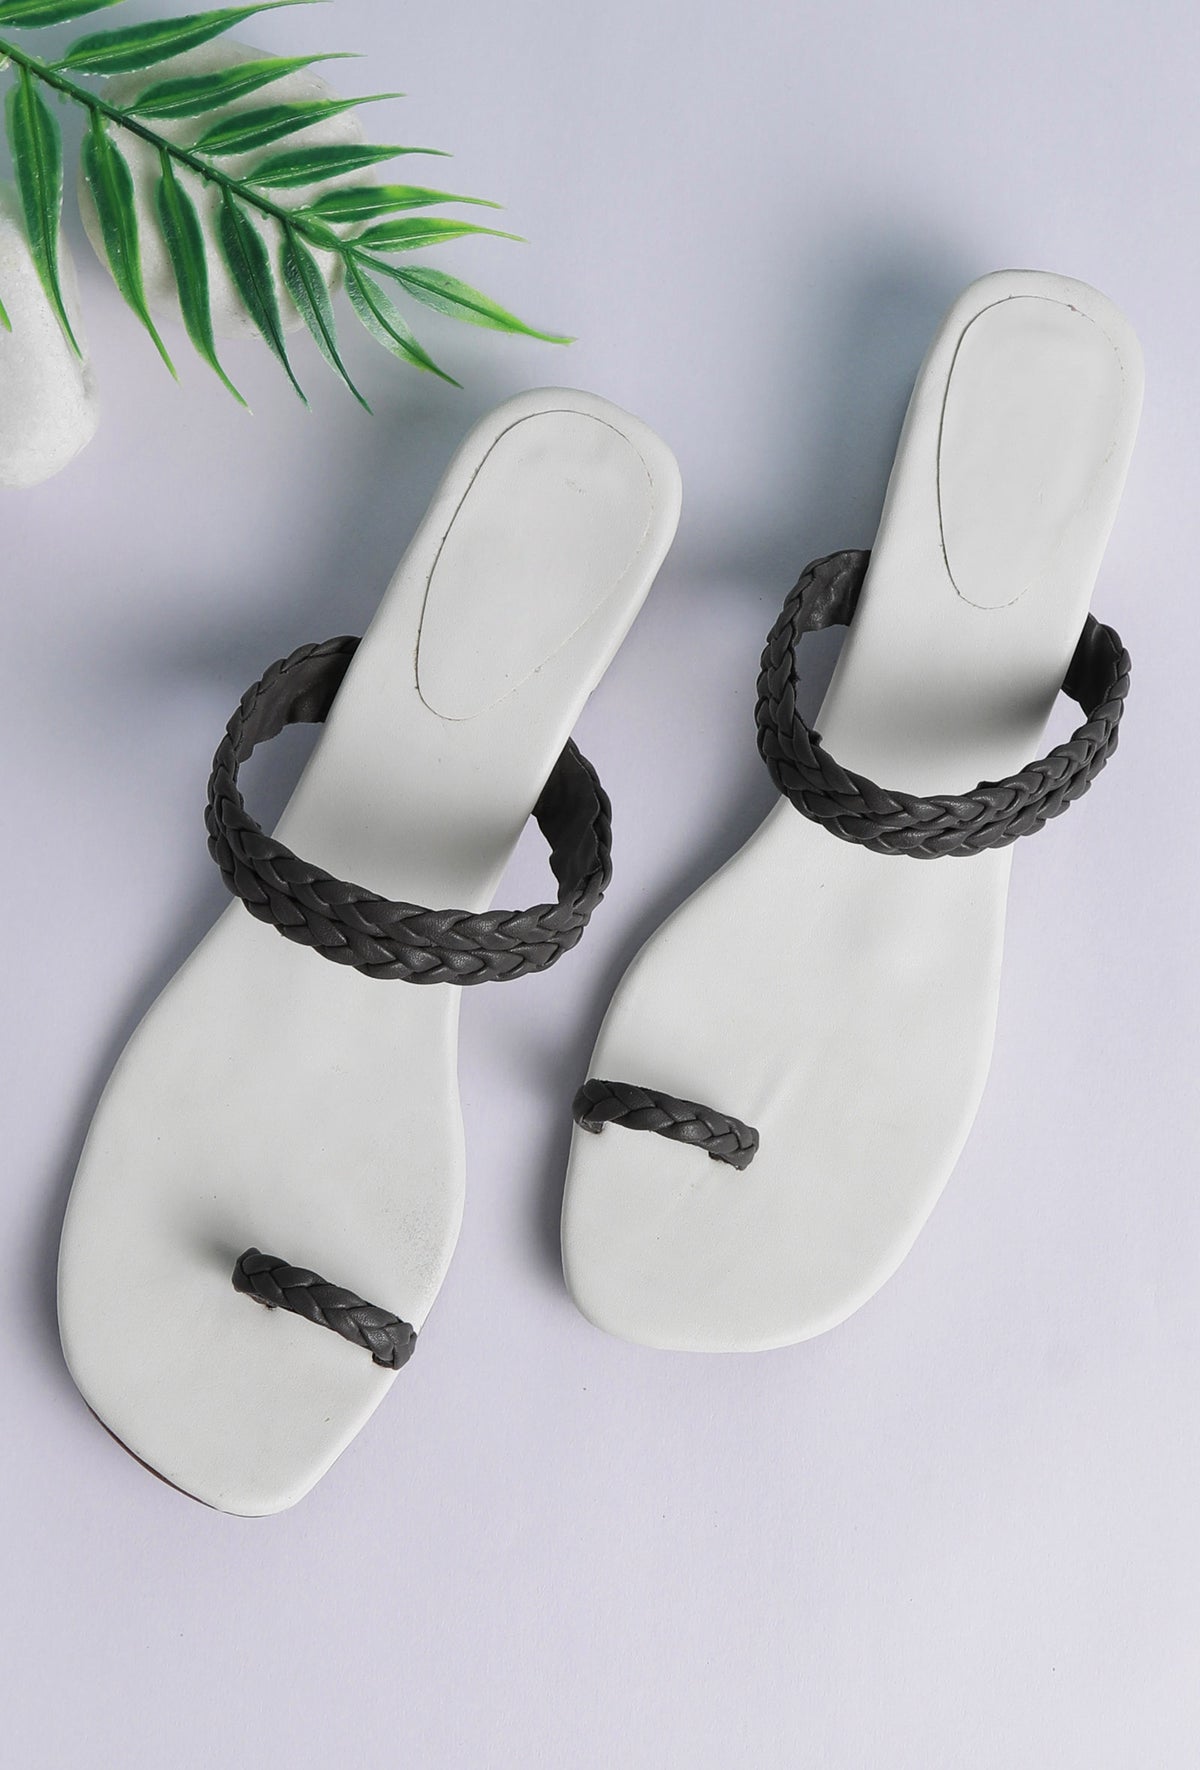 Onyx Black Knotted Cruelty Free Leather Sandals